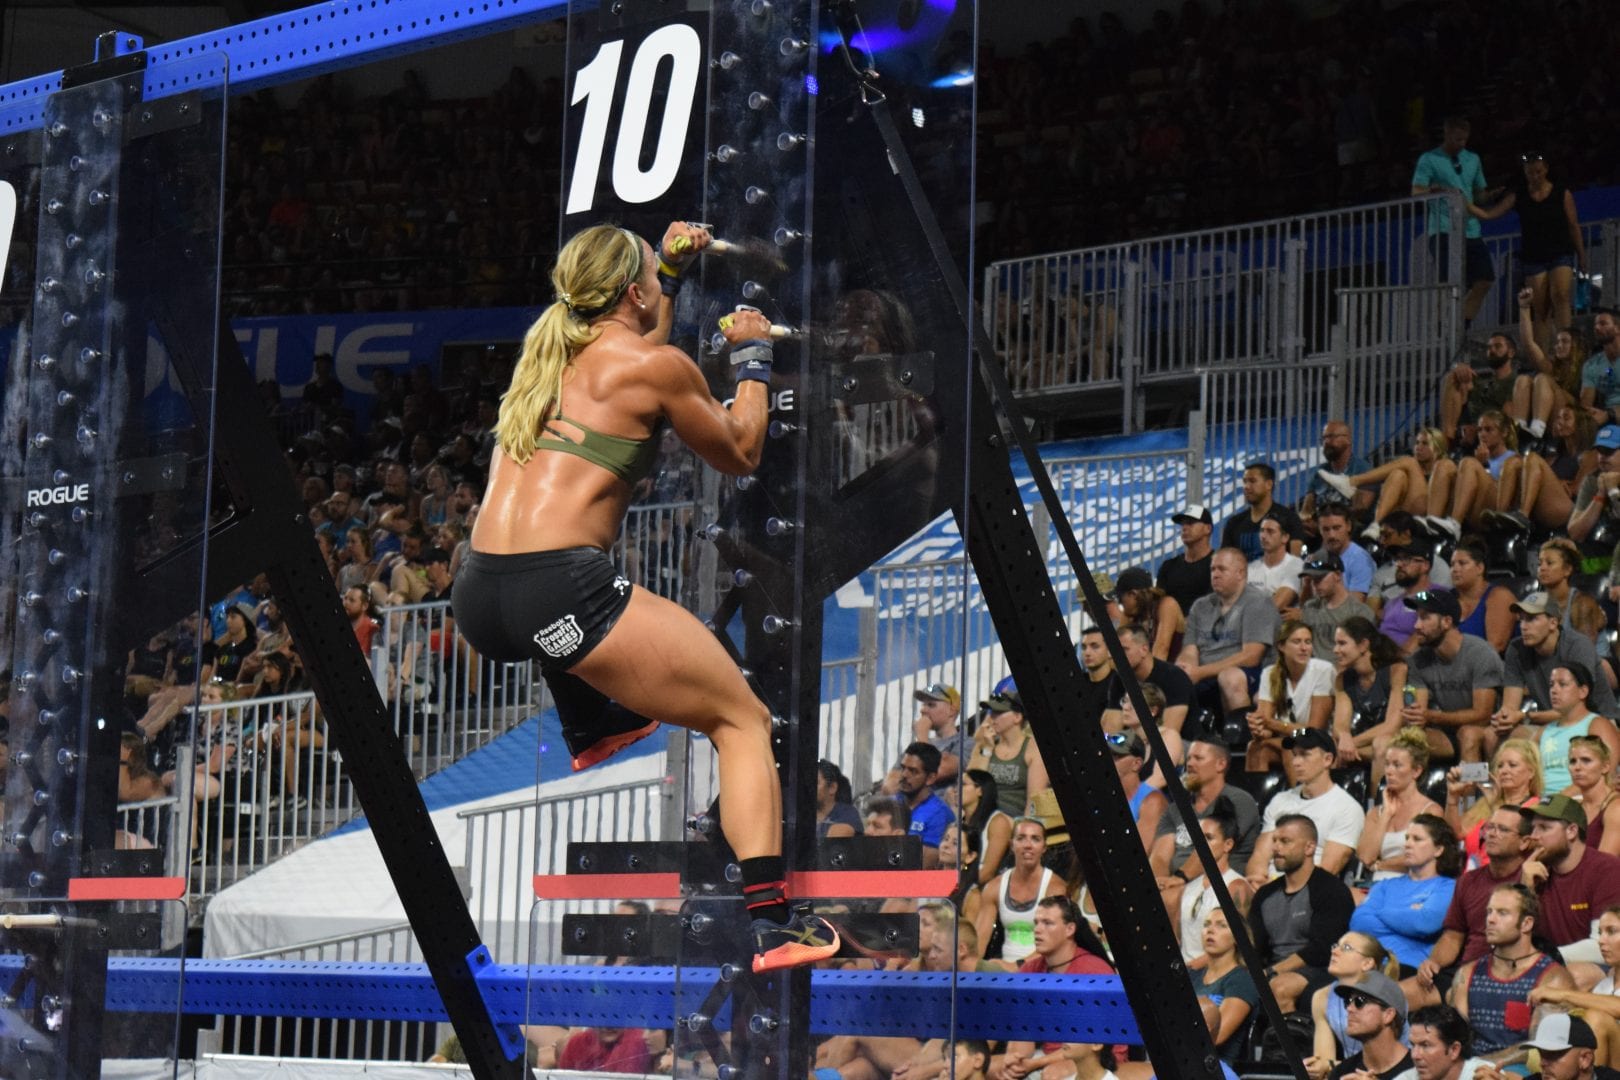 Amanda Barnhart climbs a pegboard in the Coliseum at the 2019 CrossFit Games